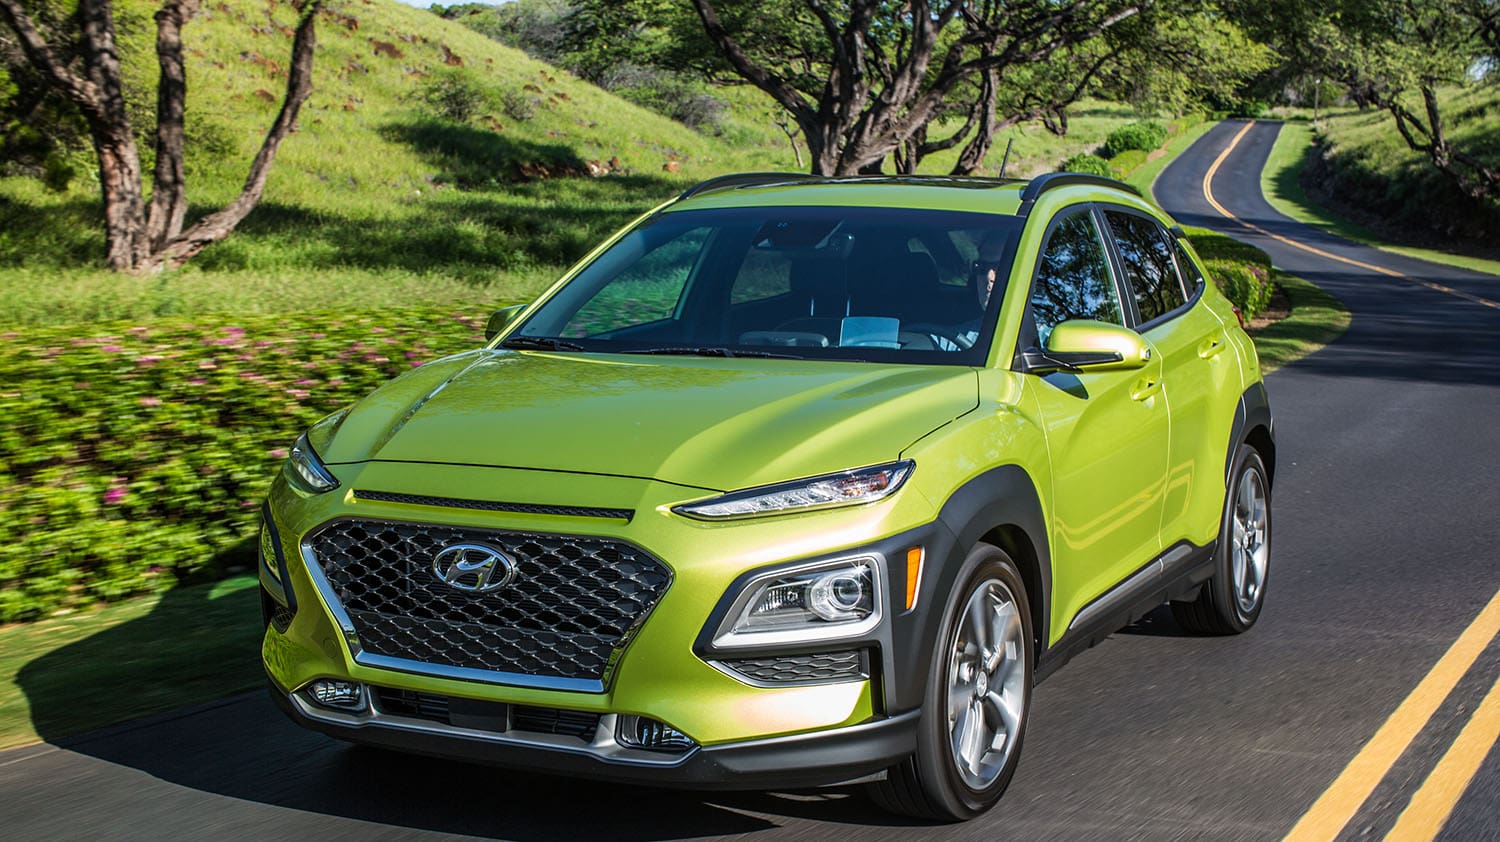 The 2018 Hyundai Kona Stands Out in a Sea of Sameness